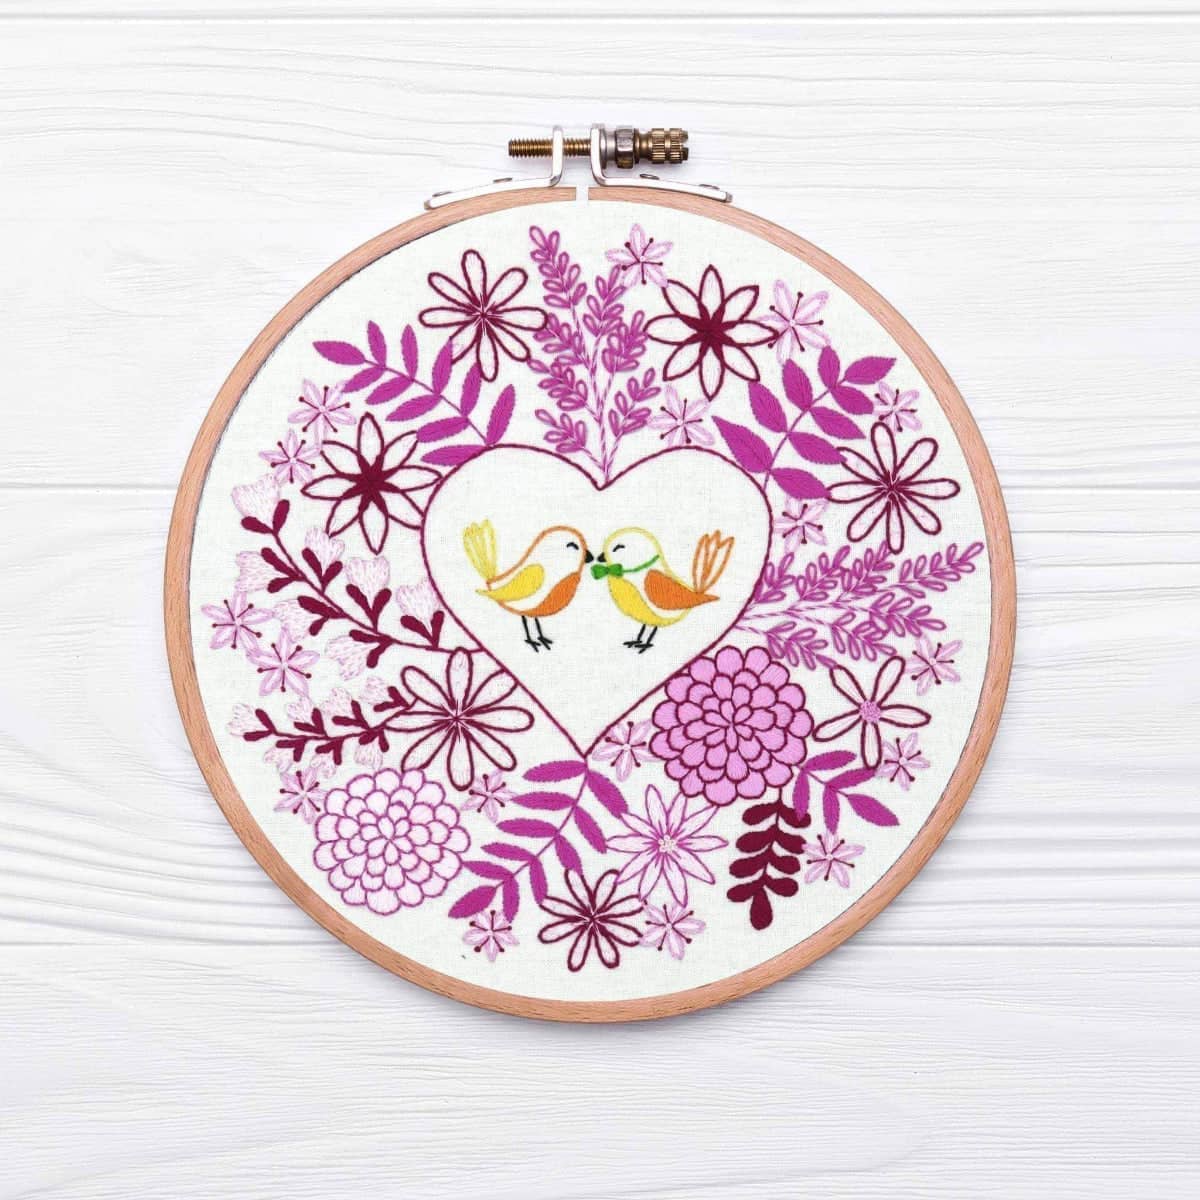 7 Must Have Hand Embroidery supplies - Stitchdoodles